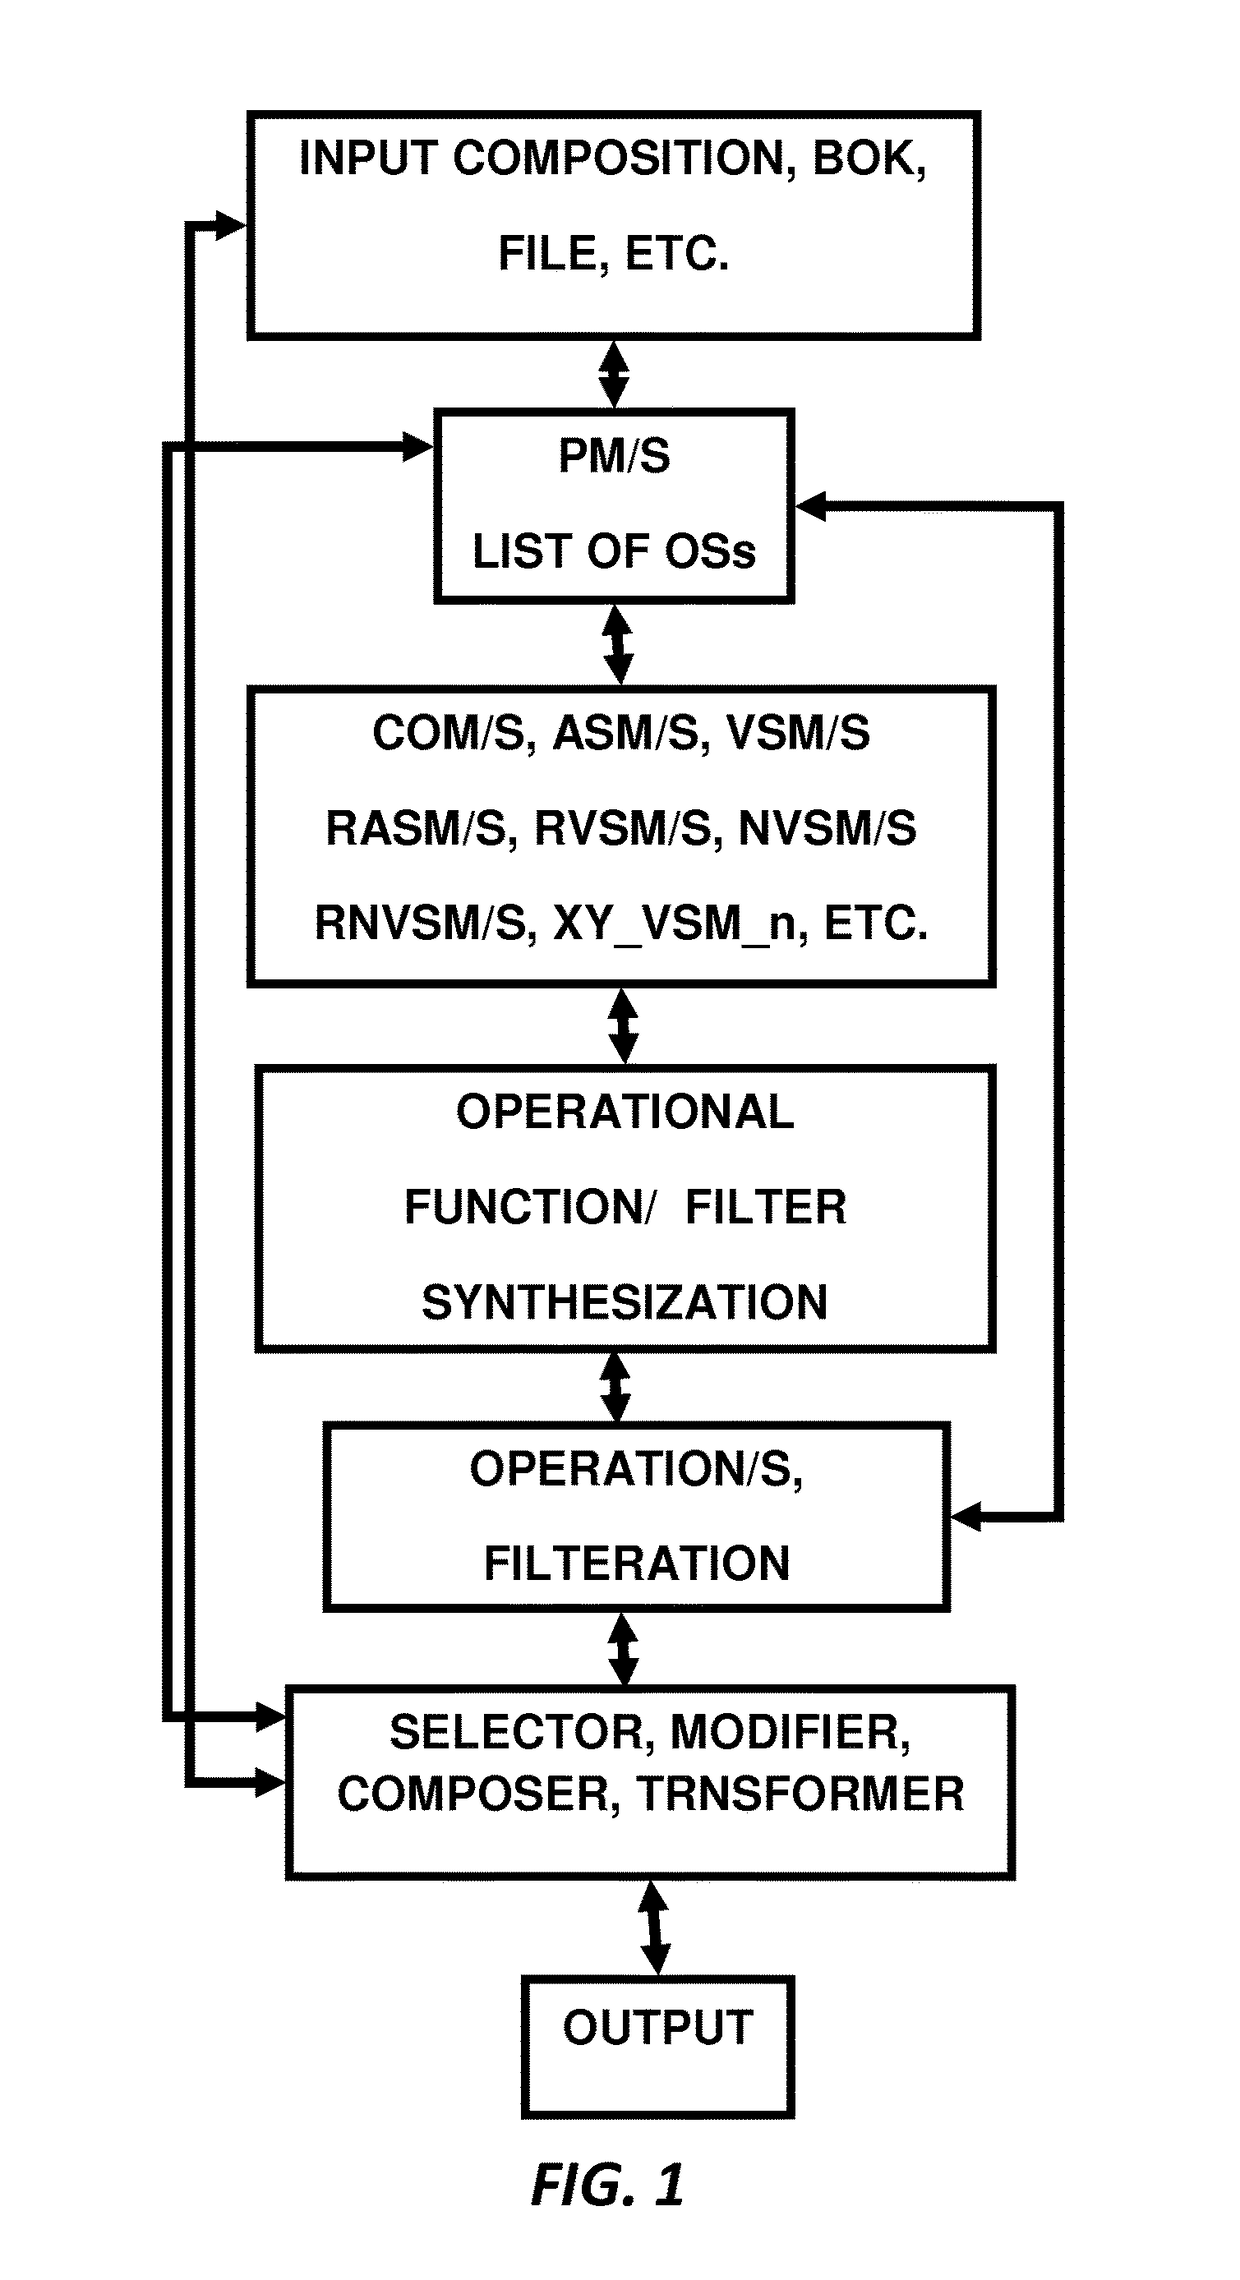 Methods and system for investigation of compositions of ontological subjects